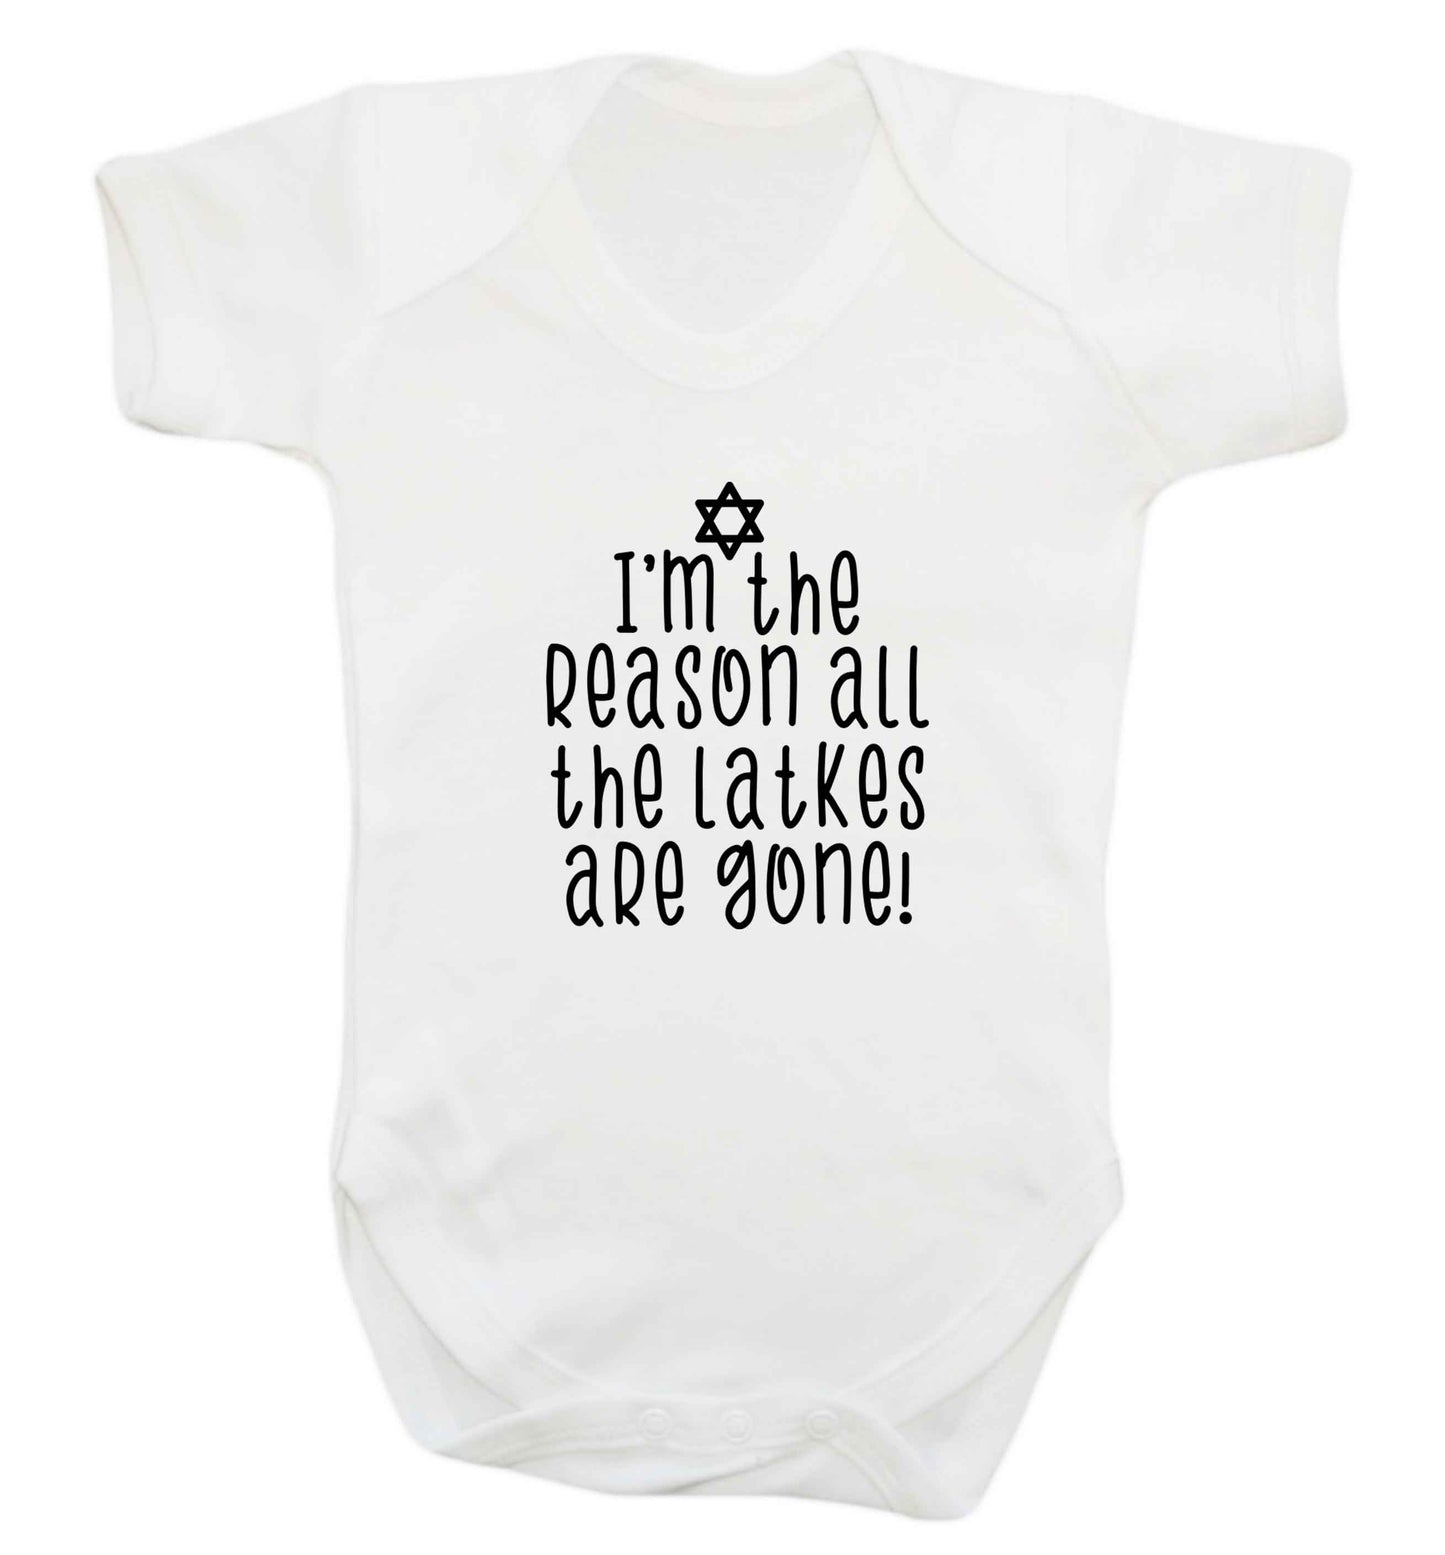 I'm the reason all the latkes are gone baby vest white 18-24 months